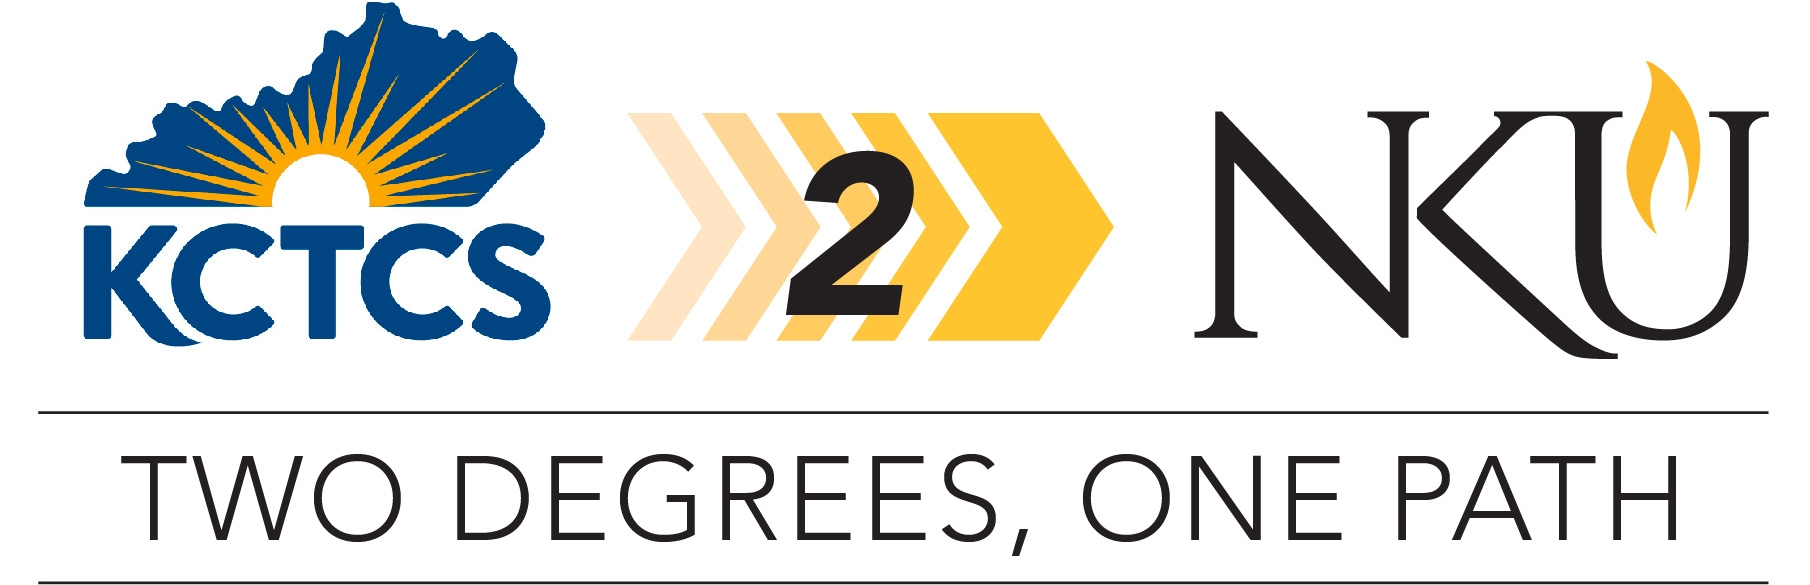 kctcs 2 NKU - two degrees, one path